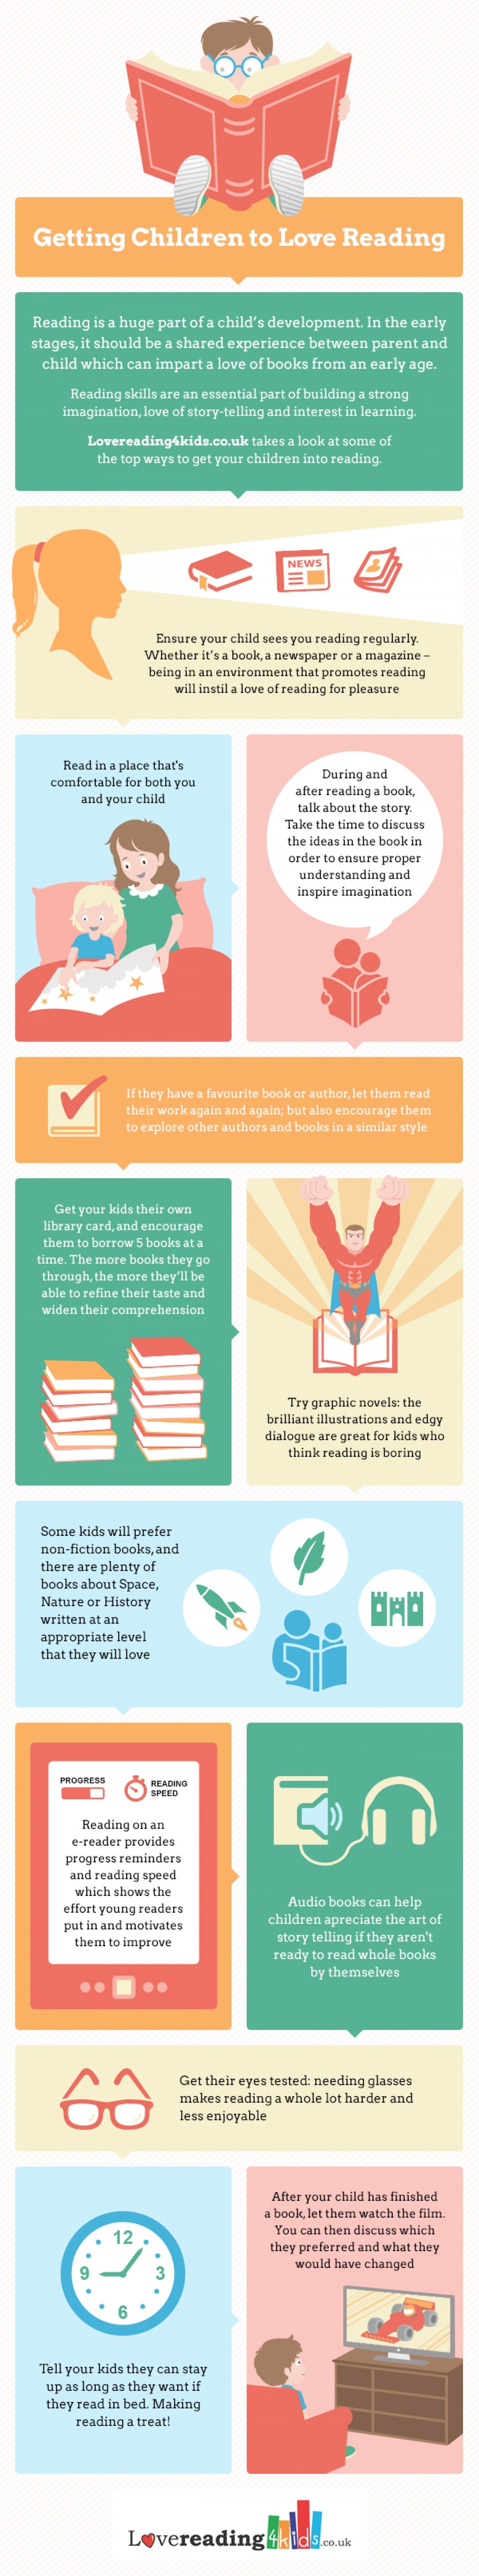 Getting Your Kids to Love Reading Infographic